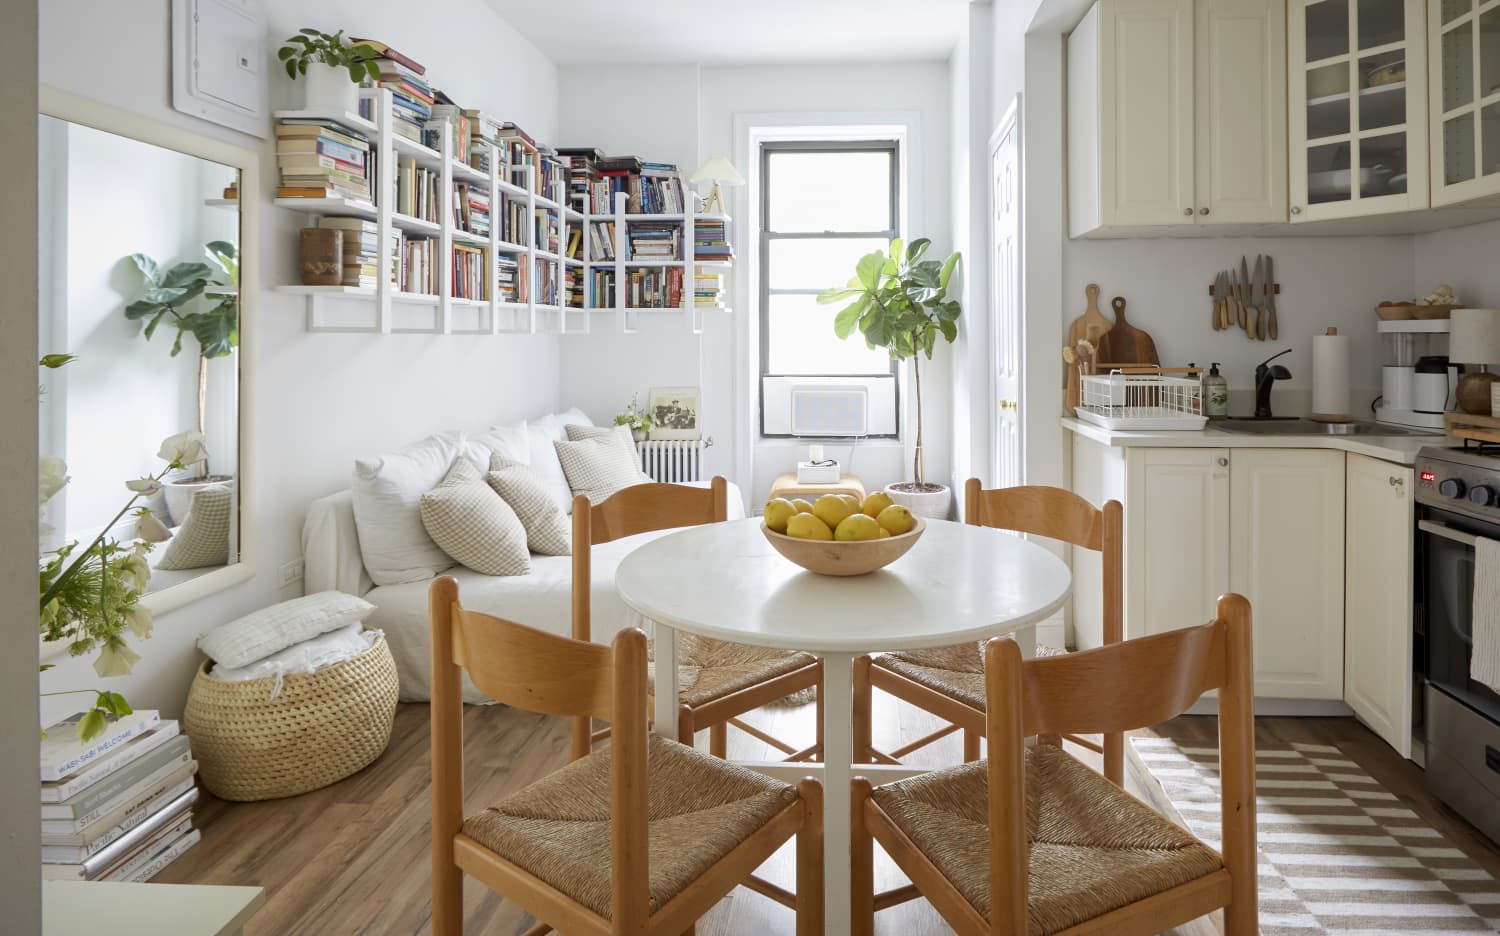 See How This Family of Five Is Able to Live Stylishly in Just 600 Square Feet